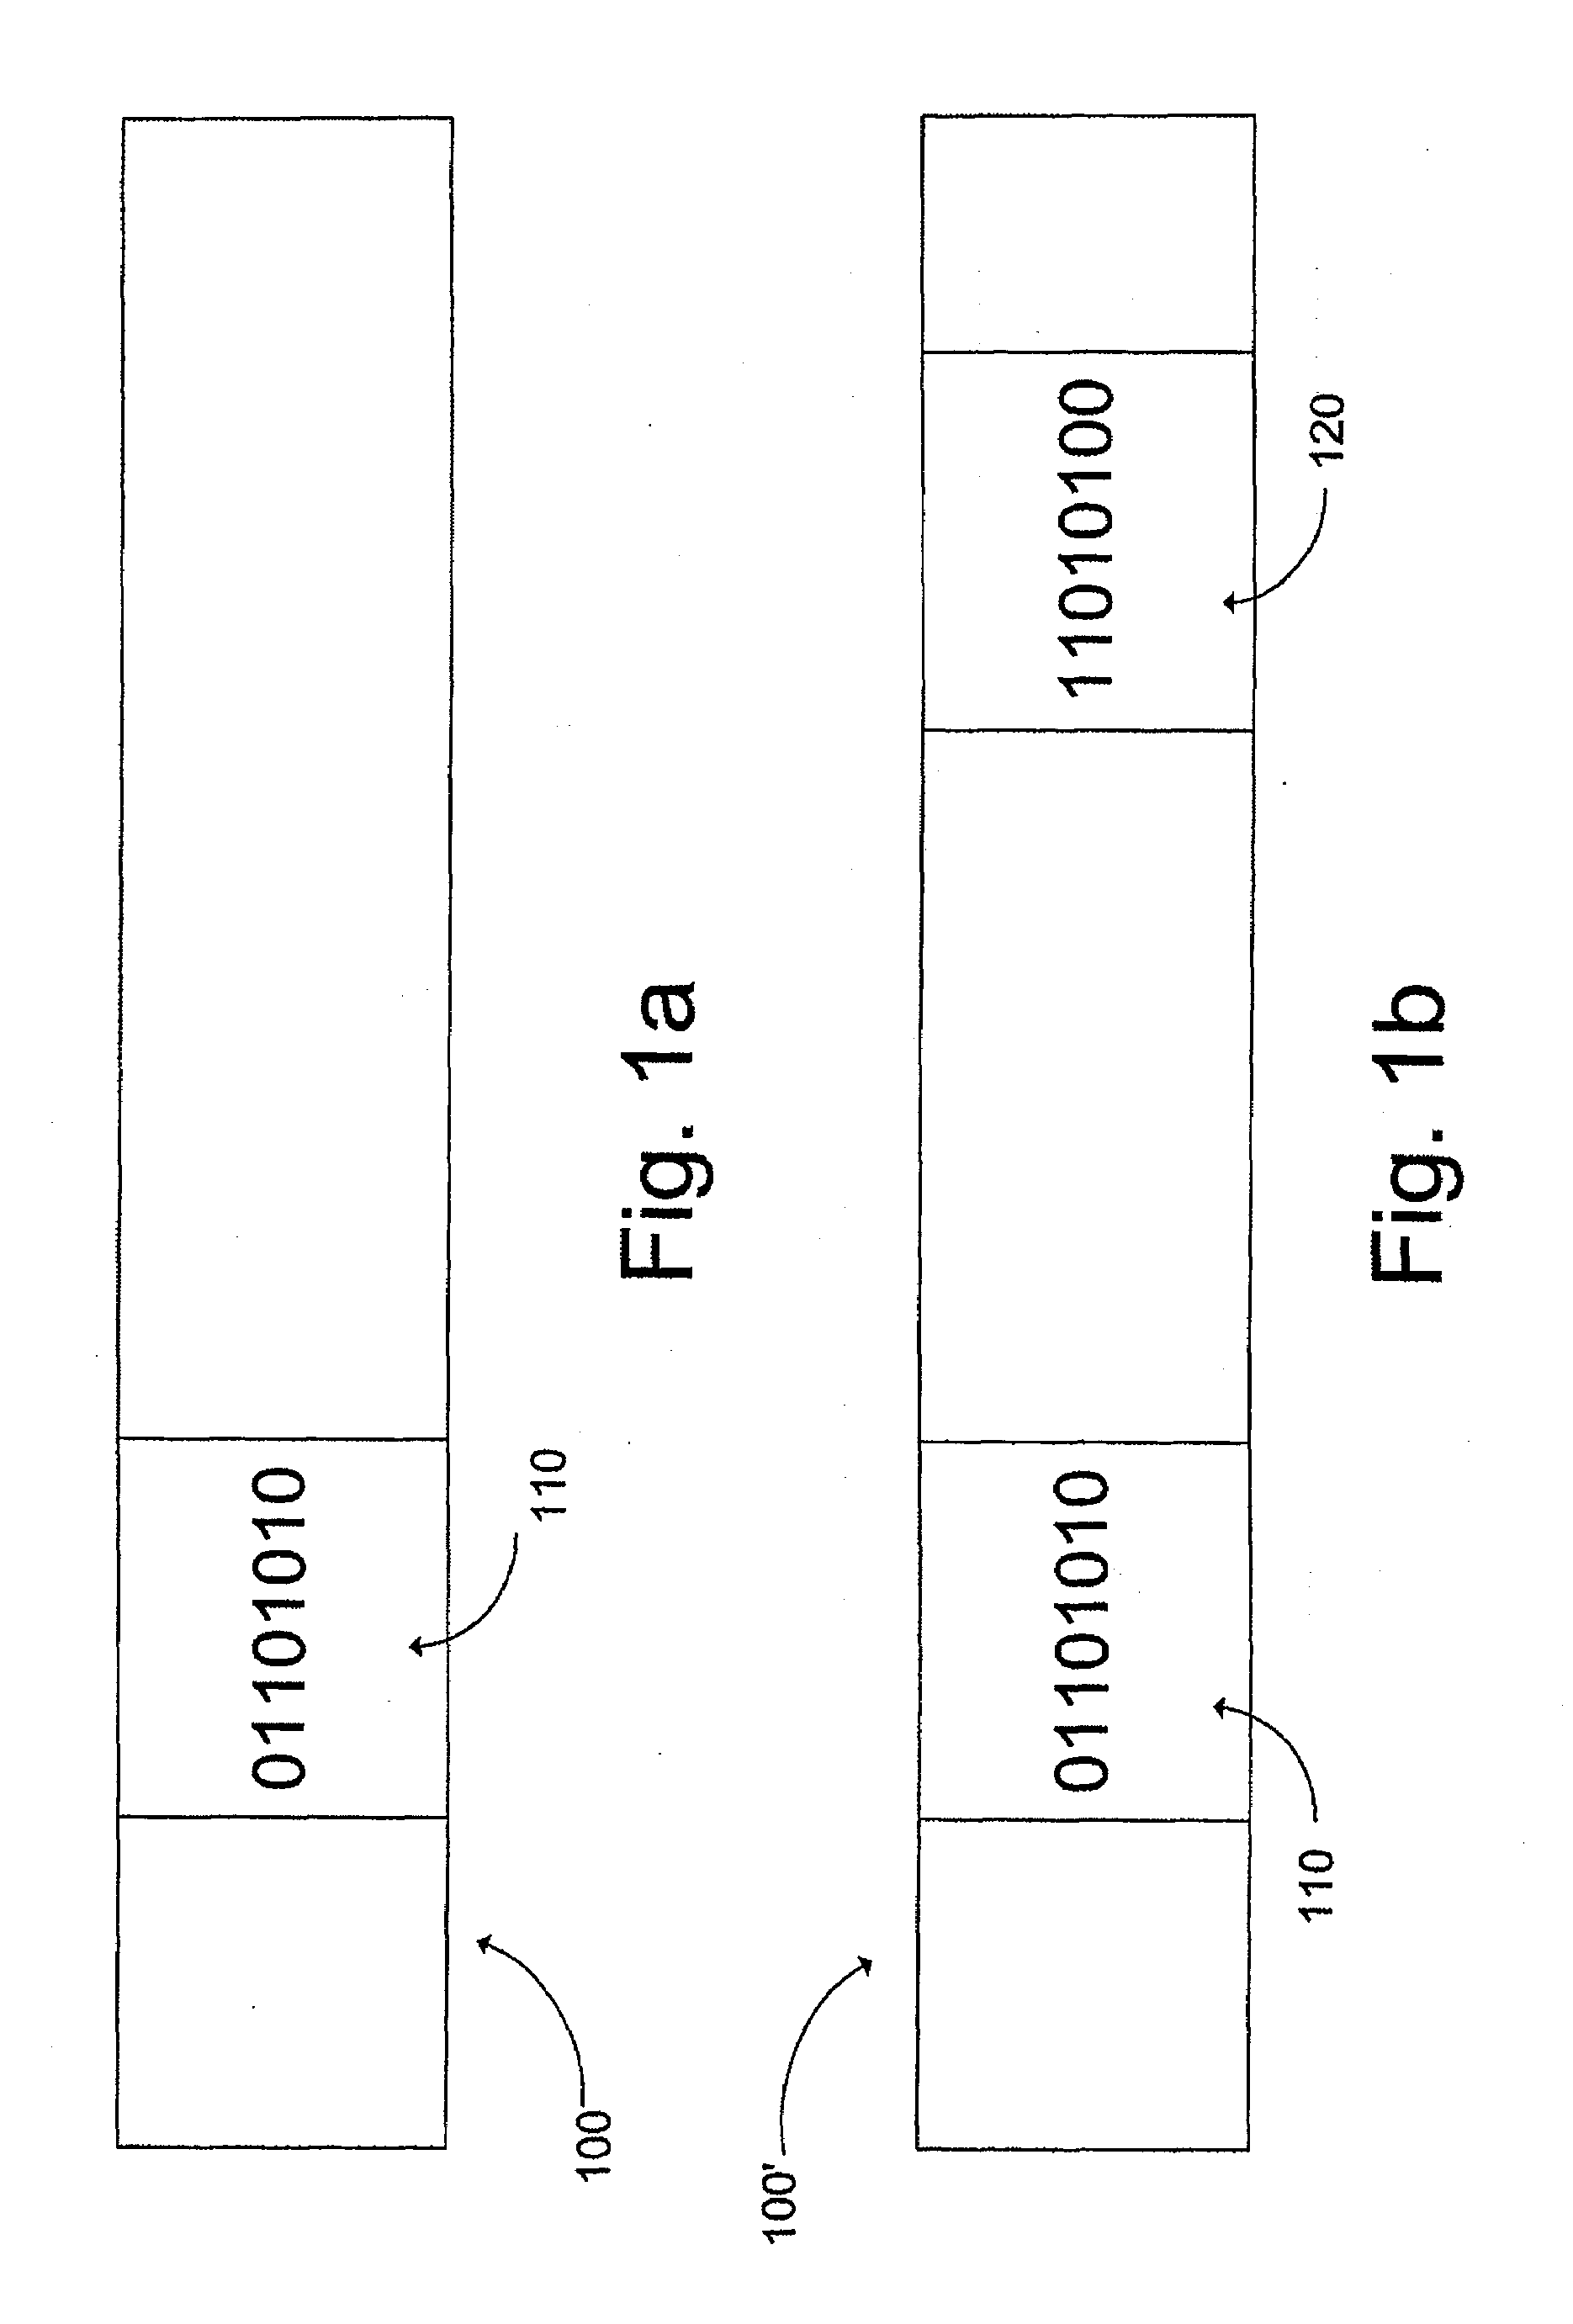 Key selection vector, mobile device and method for processing the key selection vector, digital content output device, and revocation list